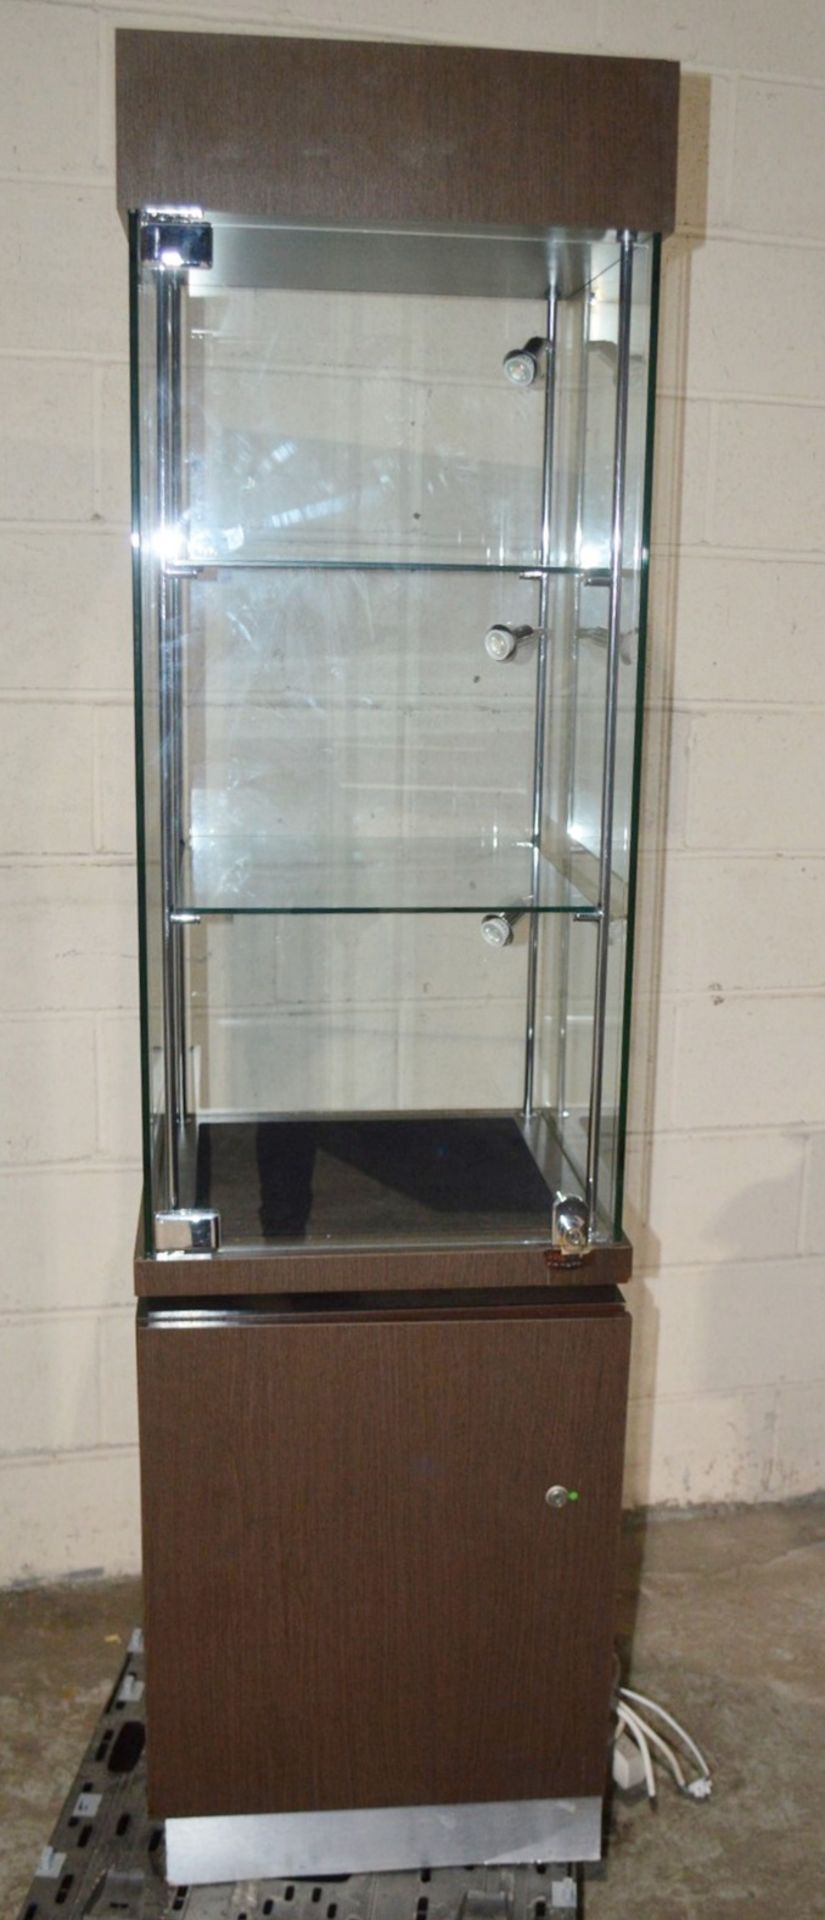 1 x Lockable Illuminated Display Case - Dimensions: H186 x W50 x D50cm - Unlocked, Without Key - Image 6 of 6